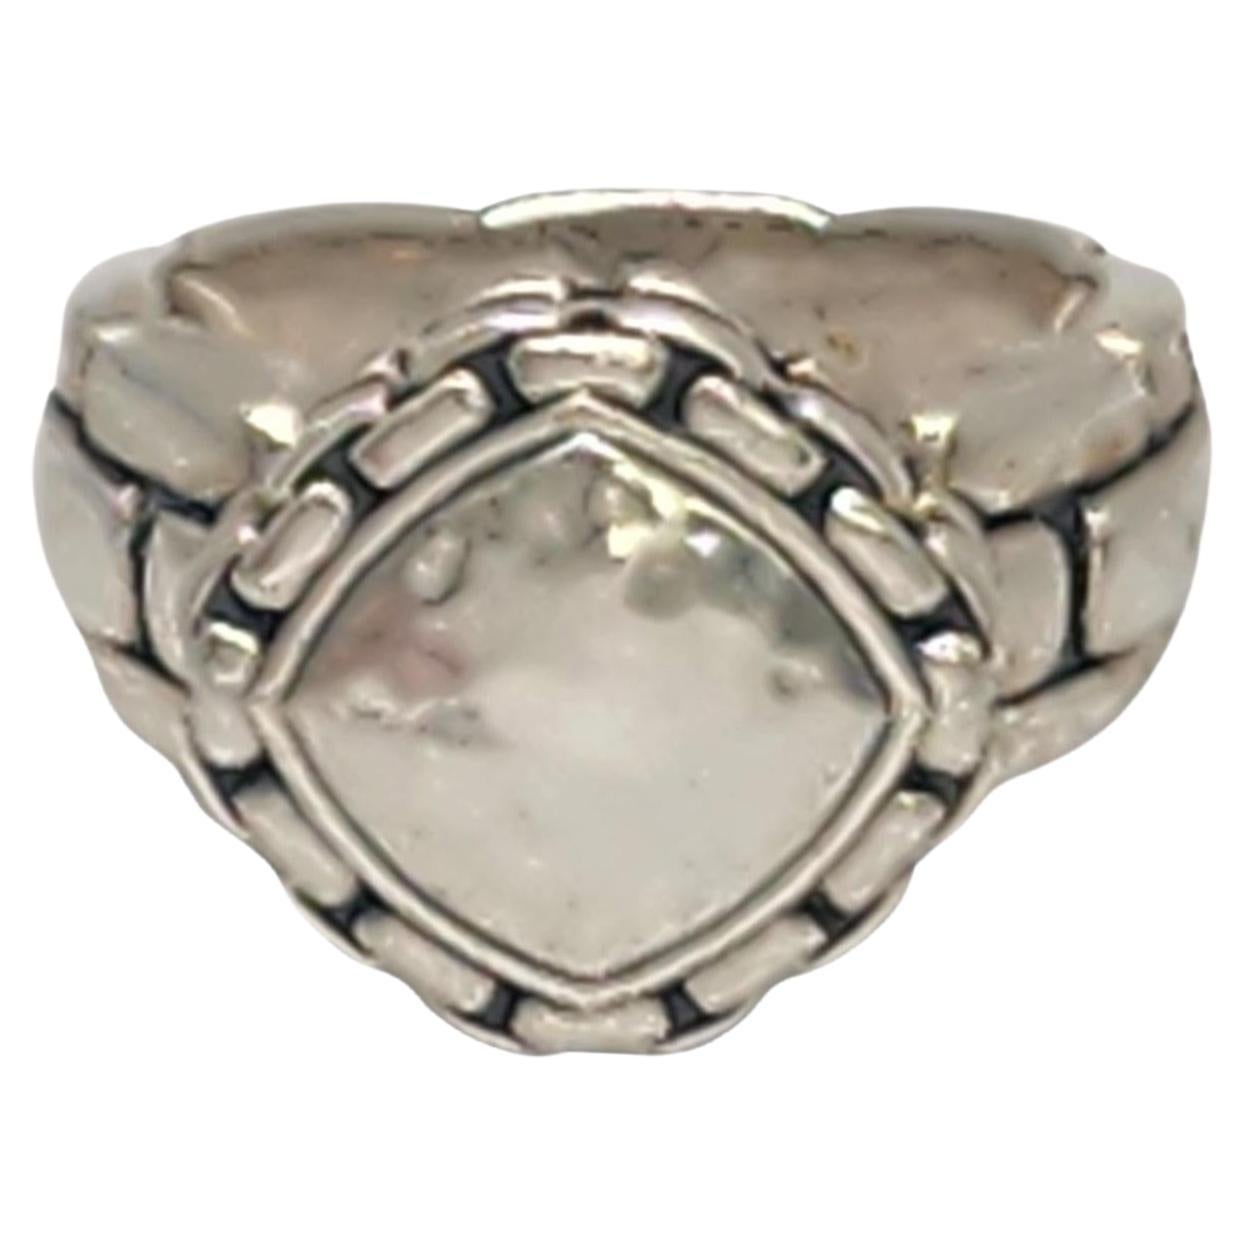 JAI by John Hardy Sterling Silver Hammered Box Chain Ring Size 7 #17359